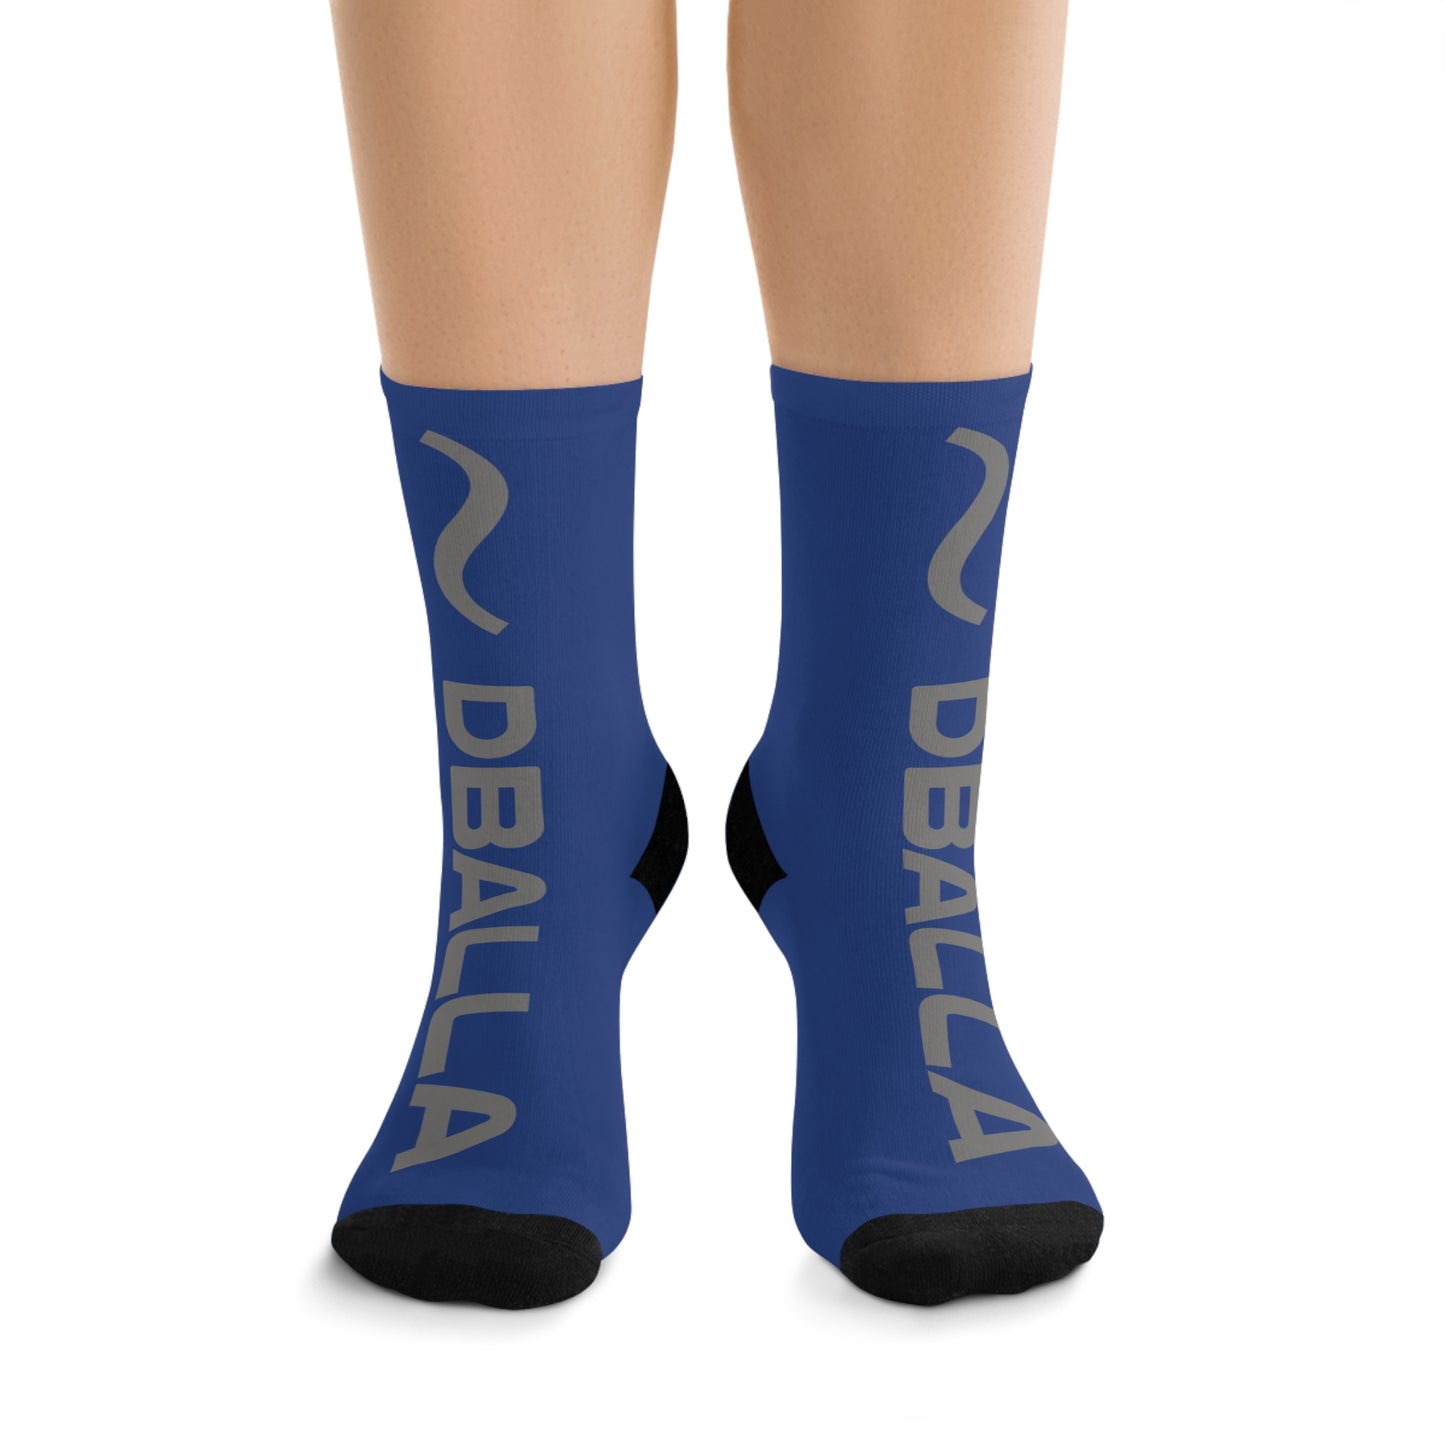 "FOOTCOVERS" Recycled Poly Socks - Cobalt Blue